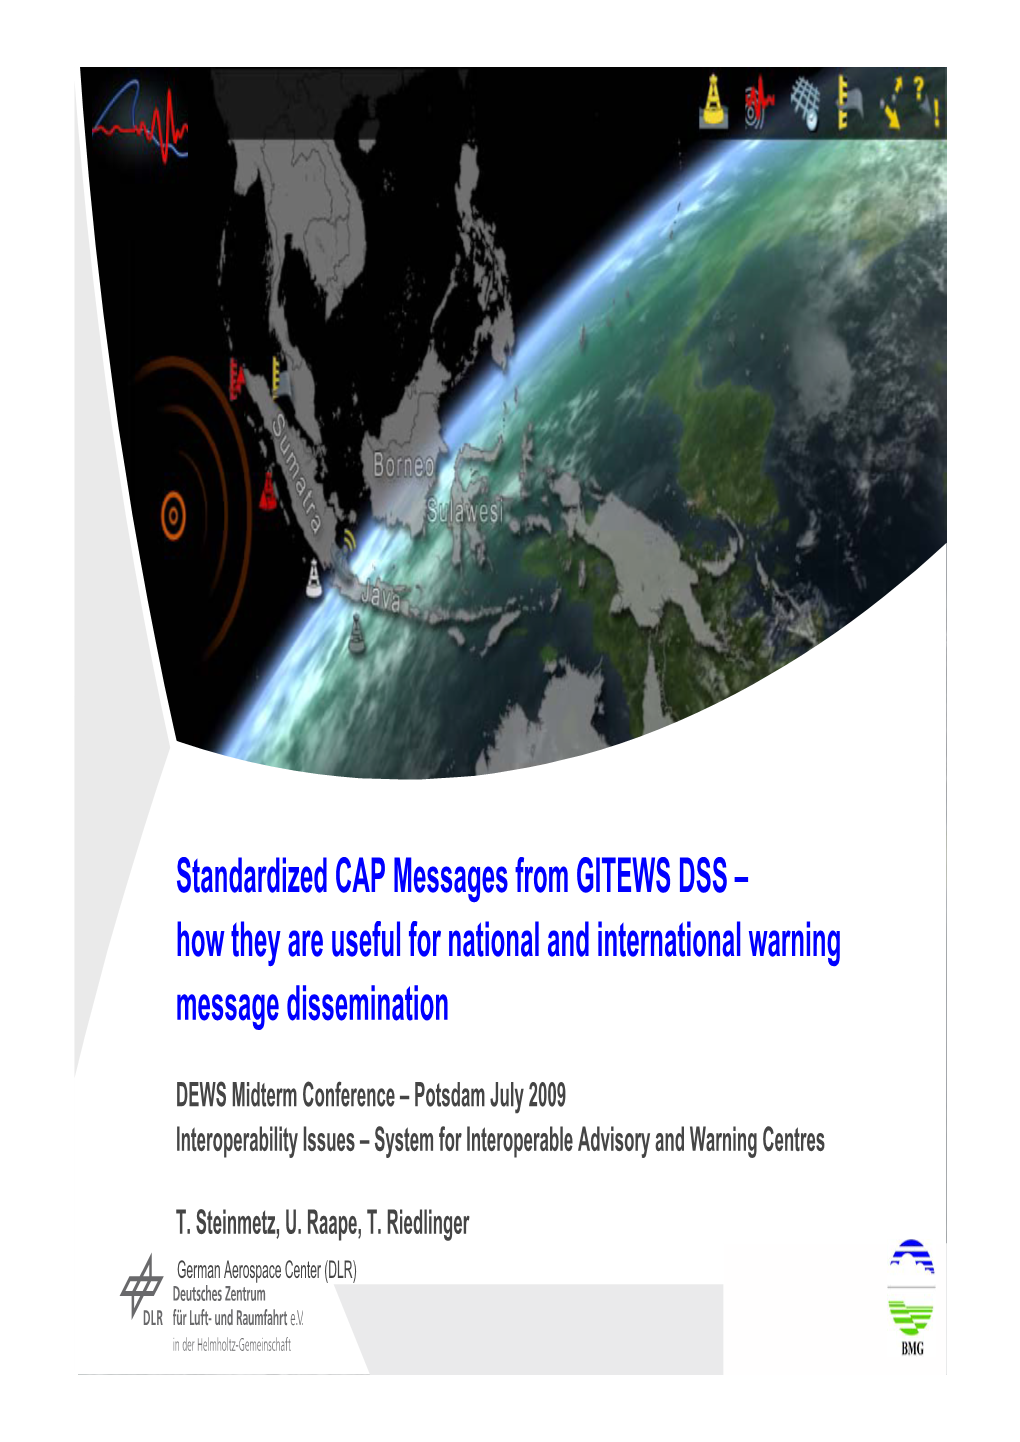 Standardized CAP Messages from GITEWS DSS – How They Are Useful for National and International Warning Message Dissemination